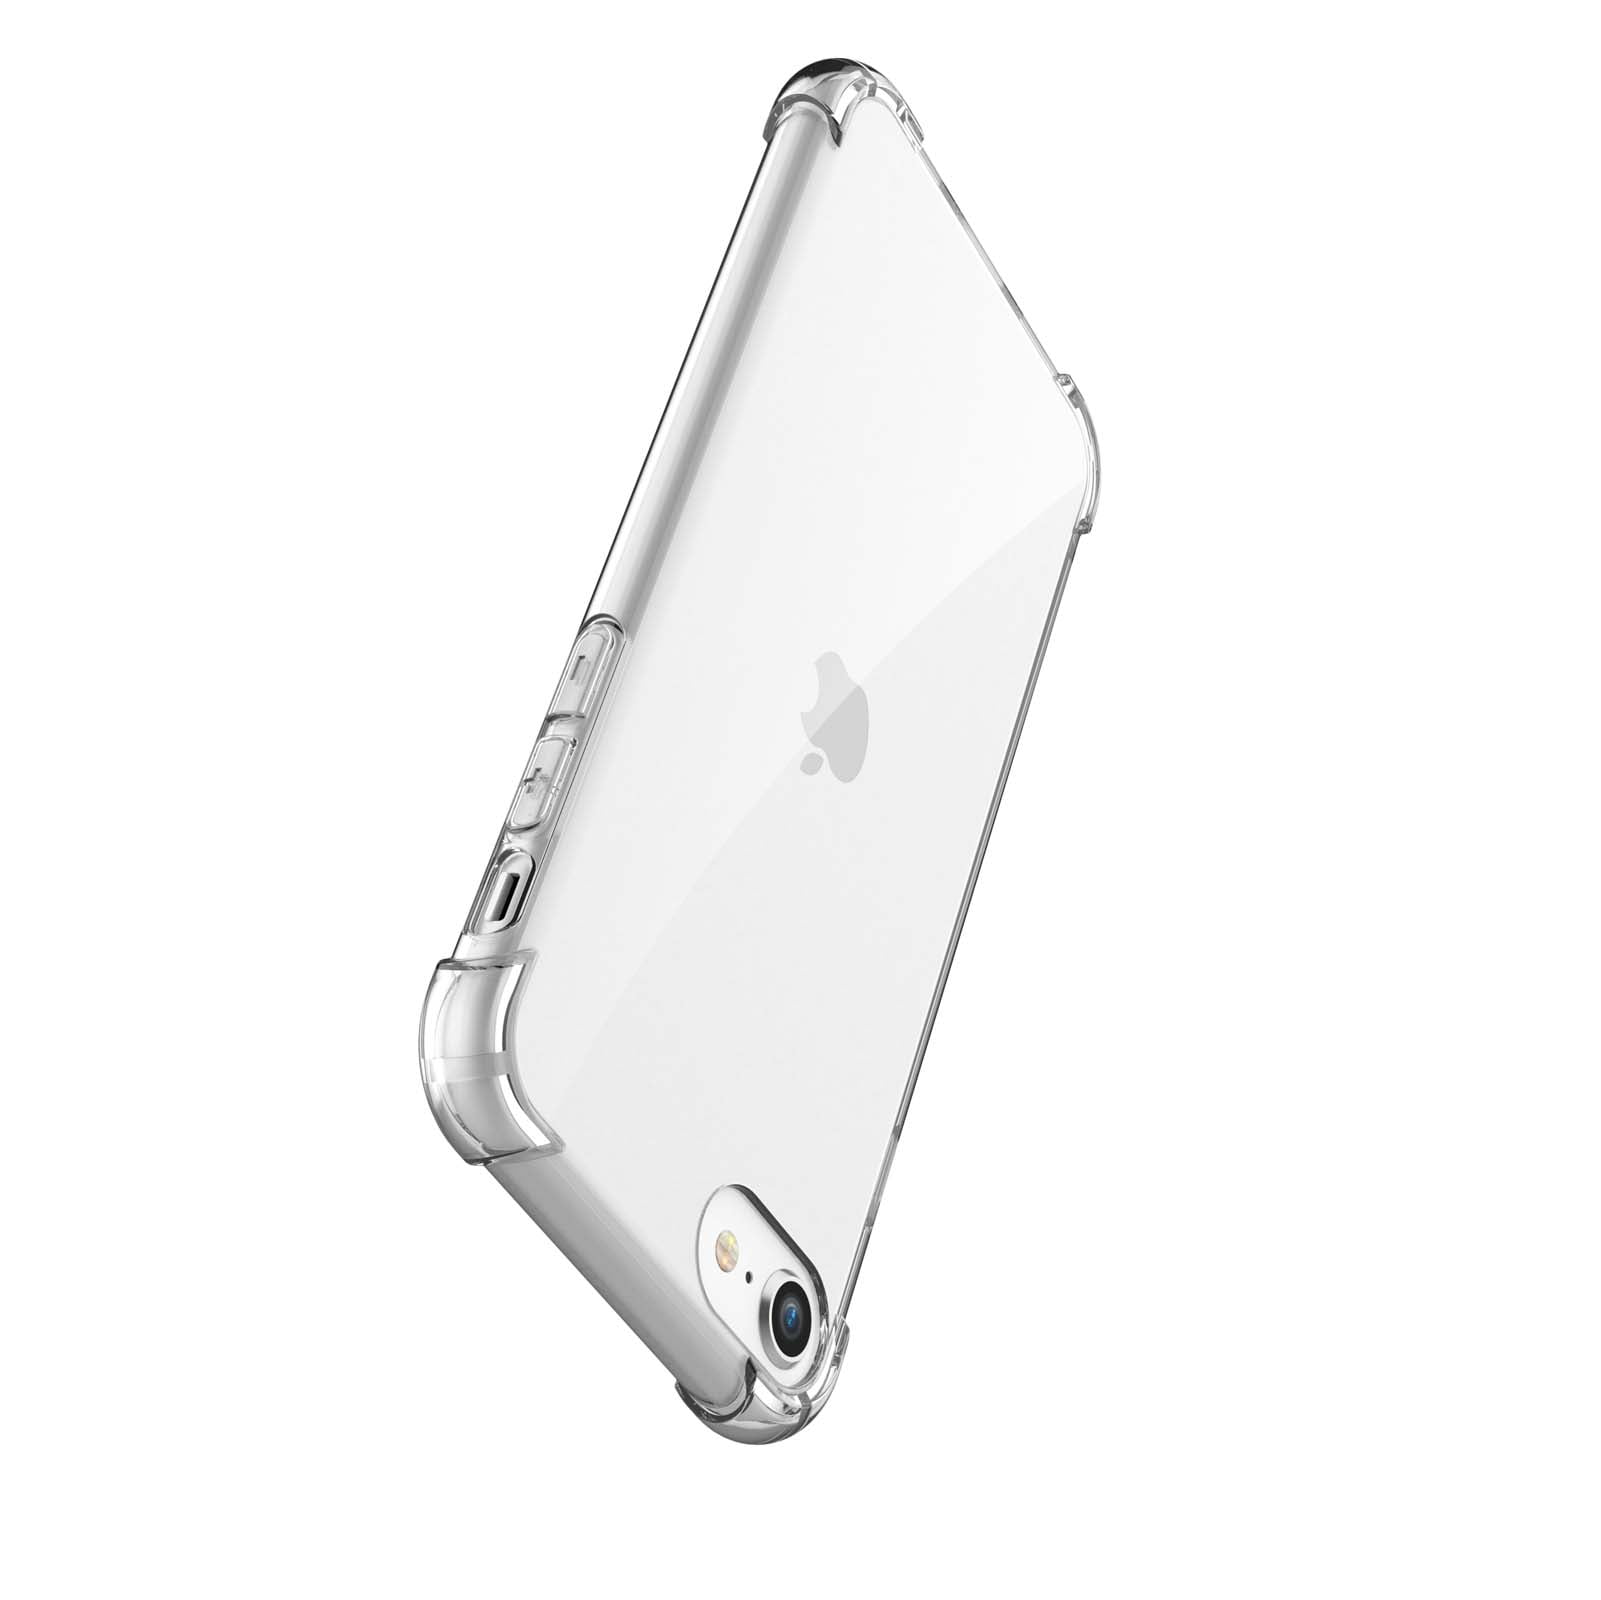 iPhone / 8 Ca, iPhone / 8 Clear Ca, iPhone / 7 Ca, Njjex Crystal Transparent  Clear Flexible Shock Absorption Bumper Soft Gel TPU Cover For iPhone / 7/8  4.7 Inch -Clear